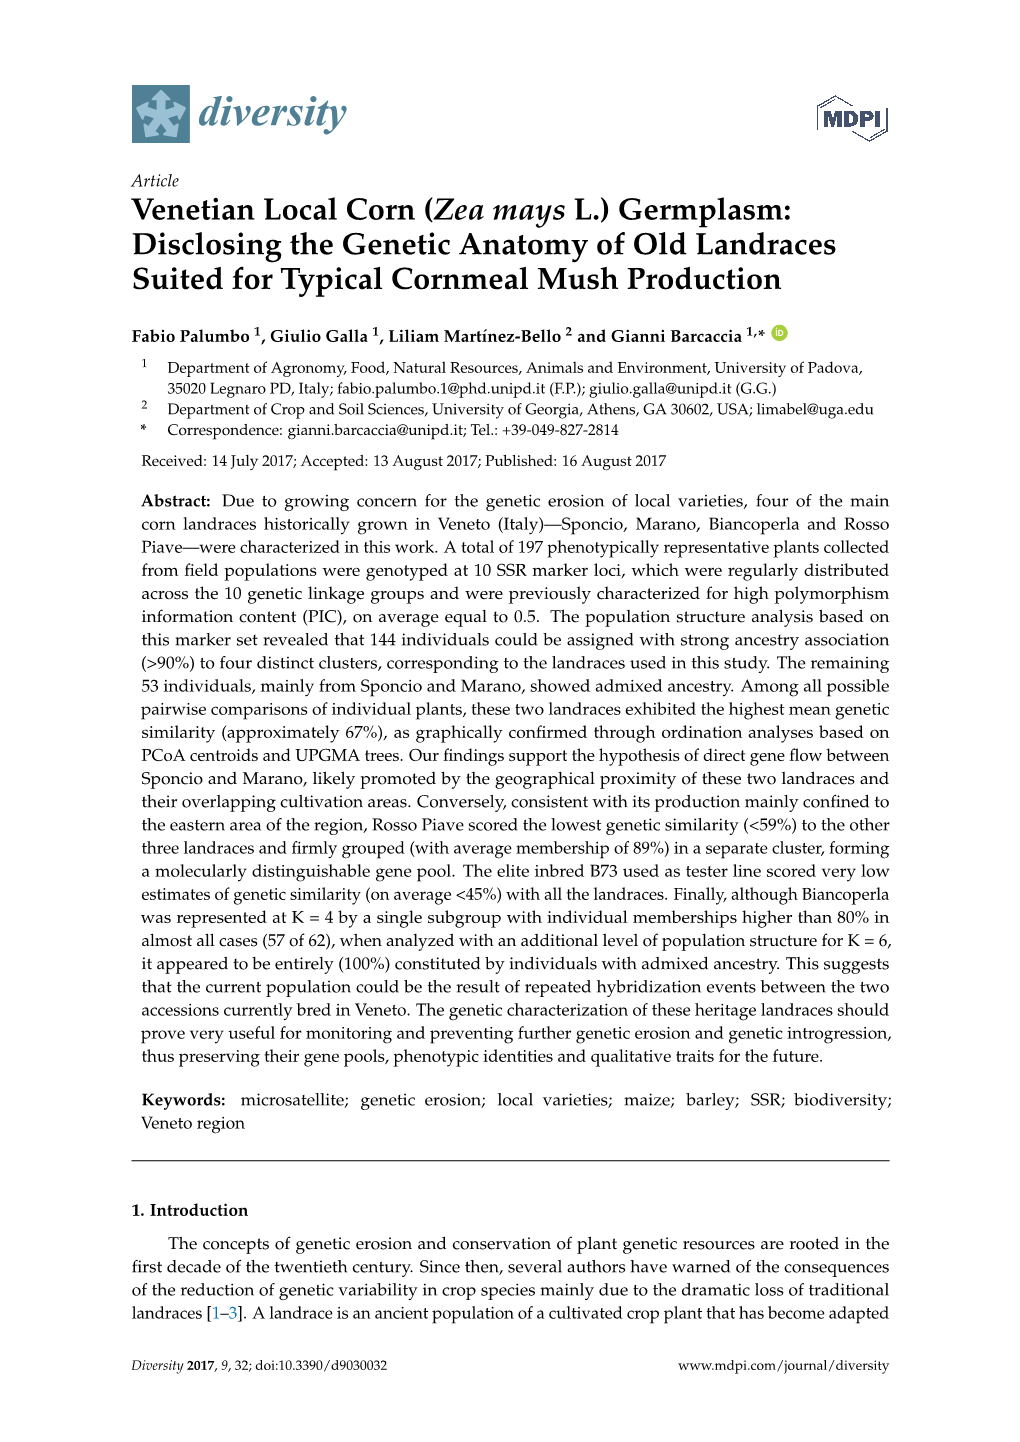 (Zea Mays L.) Germplasm: Disclosing the Genetic Anatomy of Old Landraces Suited for Typical Cornmeal Mush Production